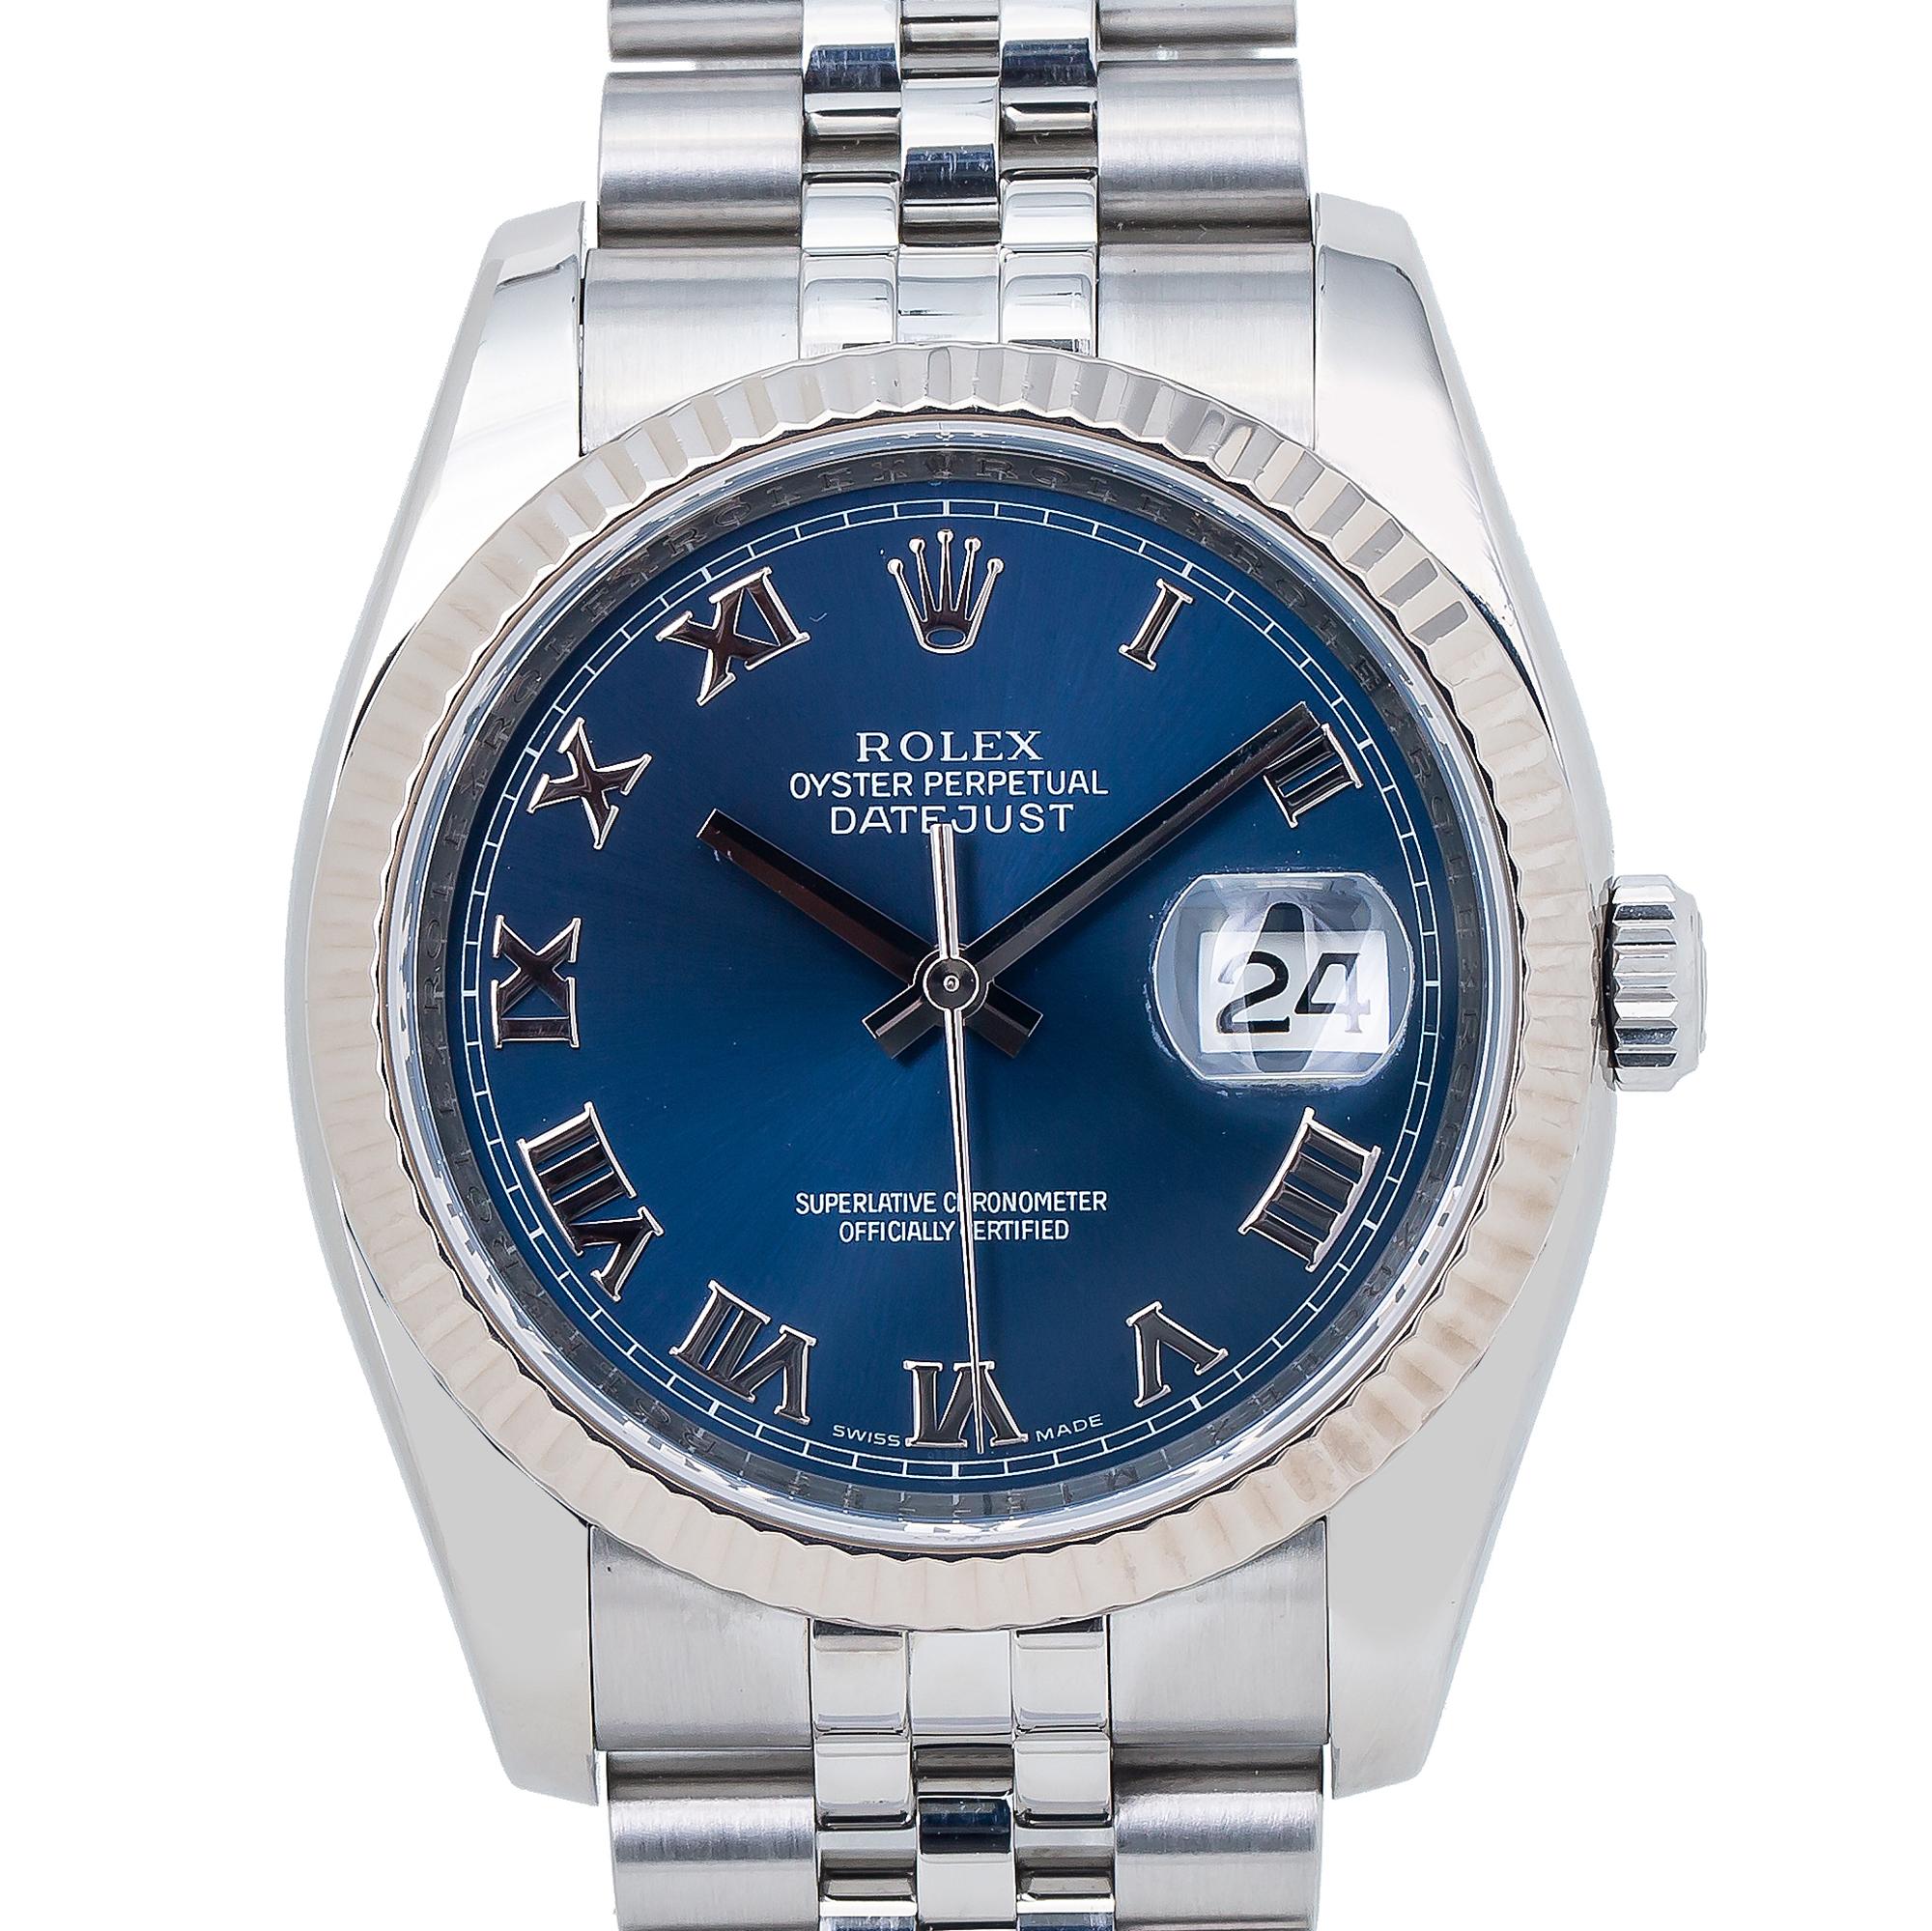 Rolex Datejust 116234 Jubilee Unisex Automatic Watch Blue Dial Stainless 36mm